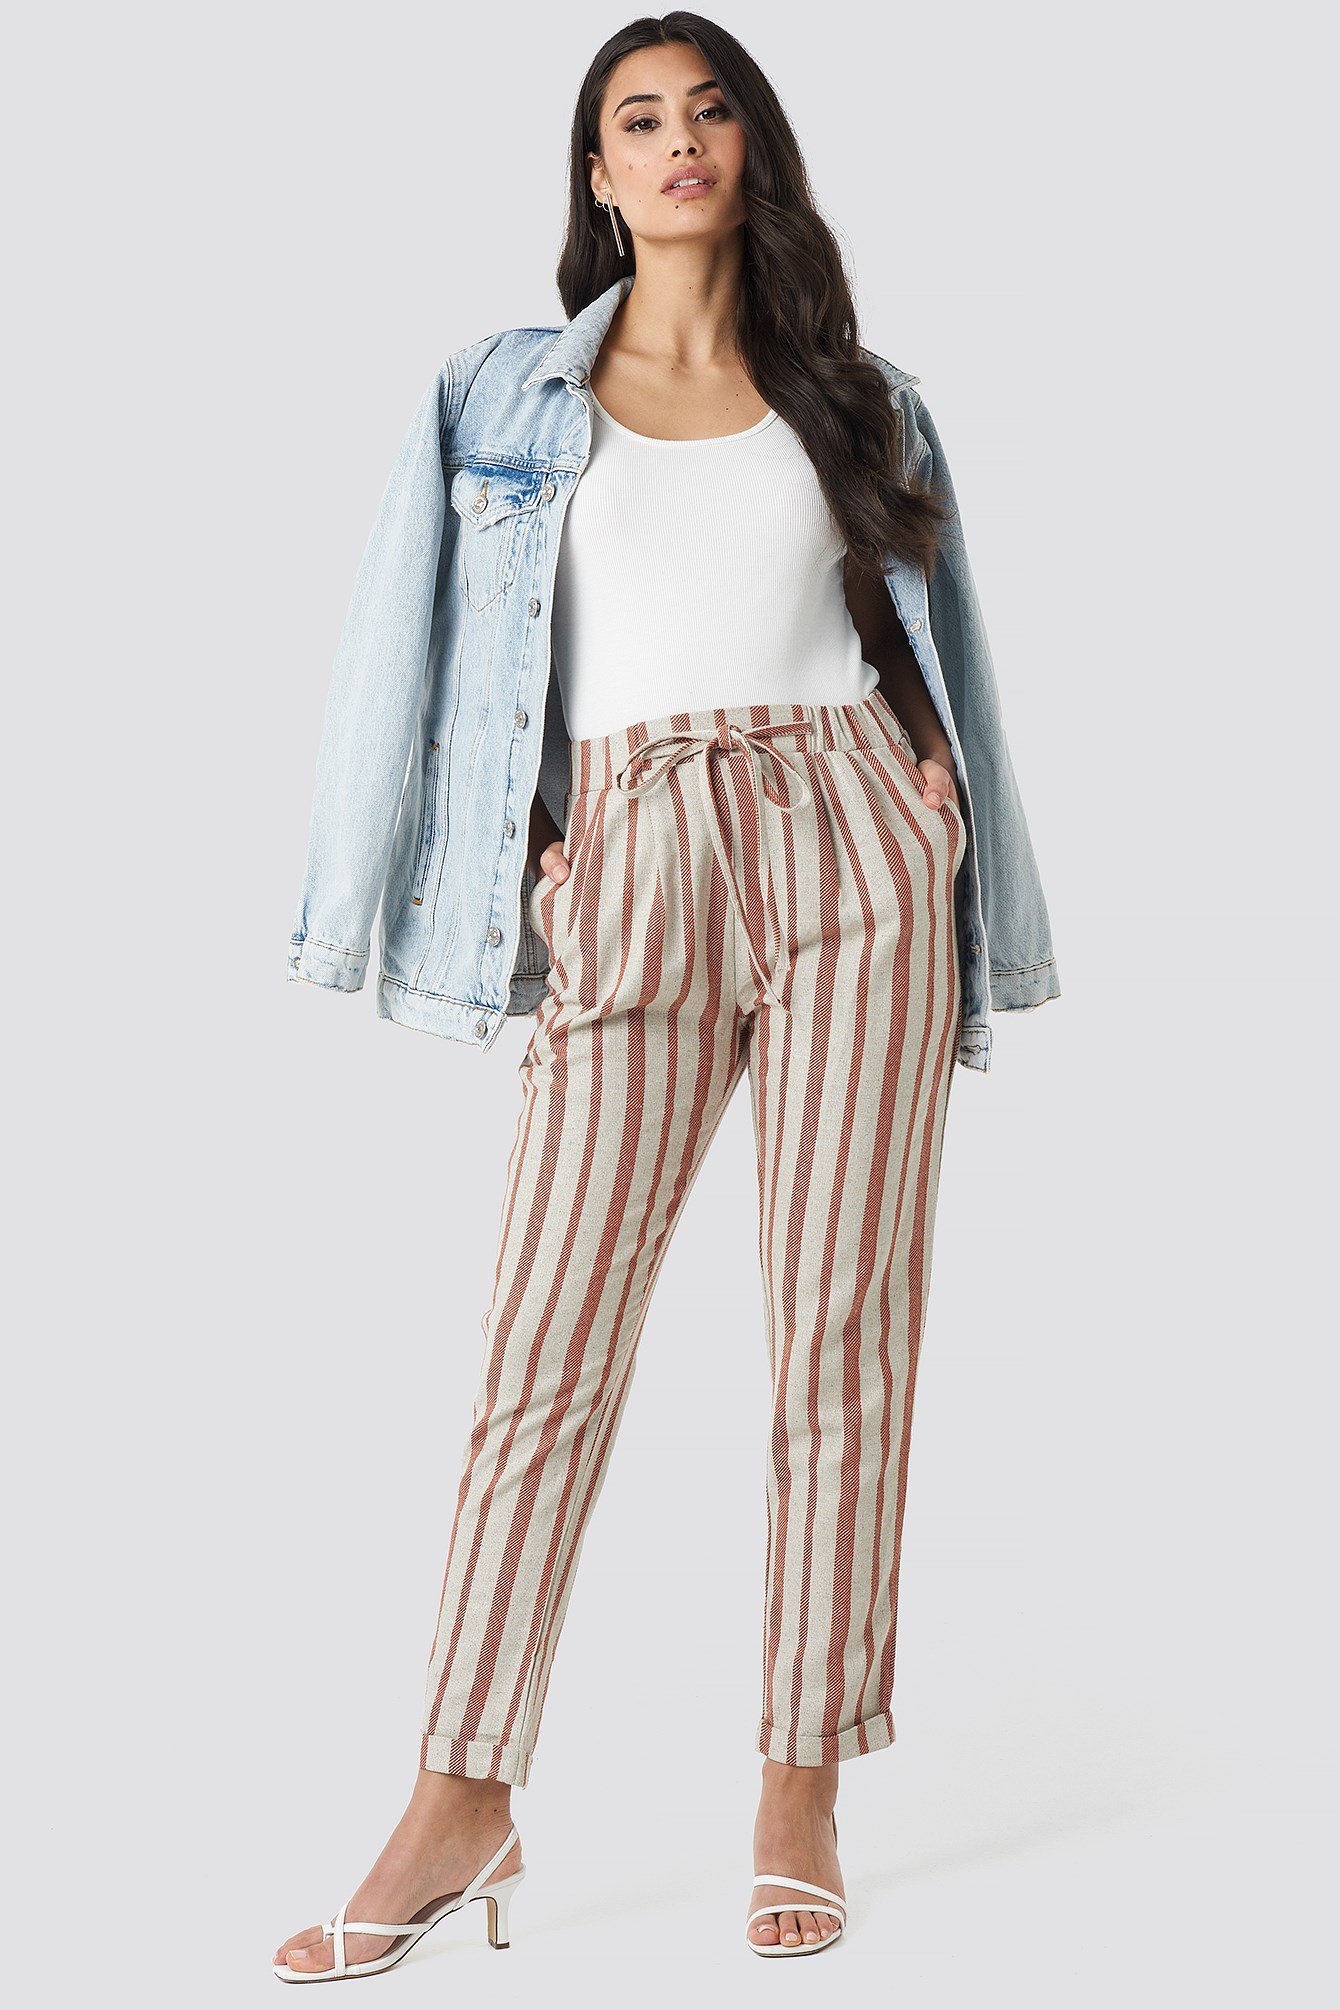 Milla Striped Pants Outfit